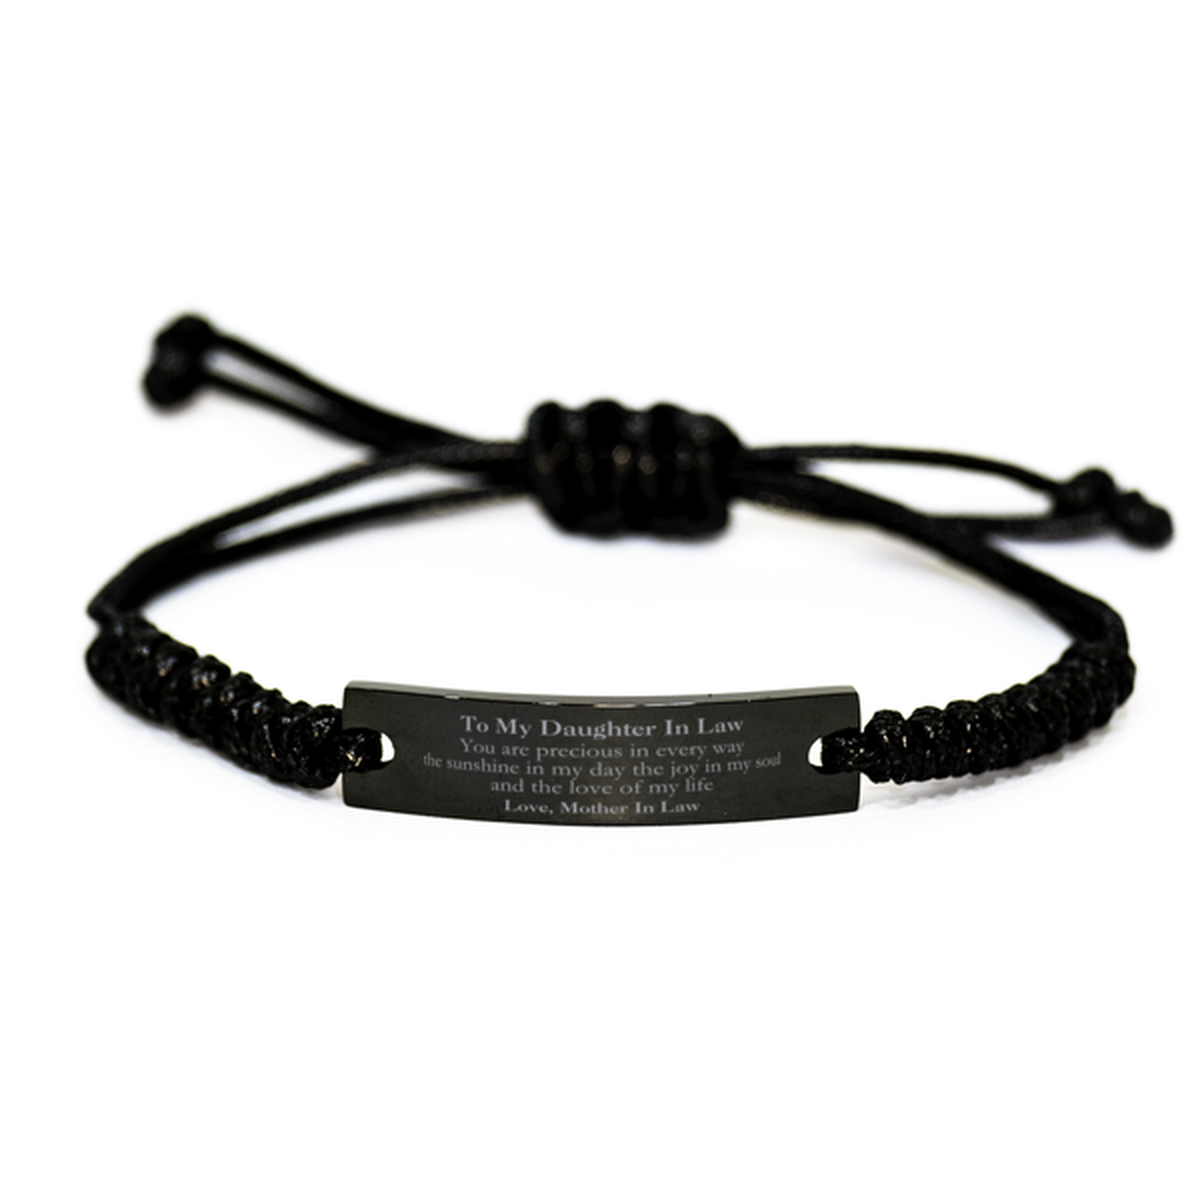 Graduation Gifts for Daughter In Law Black Rope Bracelet Present from Mother In Law, Christmas Daughter In Law Birthday Gifts Daughter In Law You are precious in every way the sunshine in my day. Love, Mother In Law